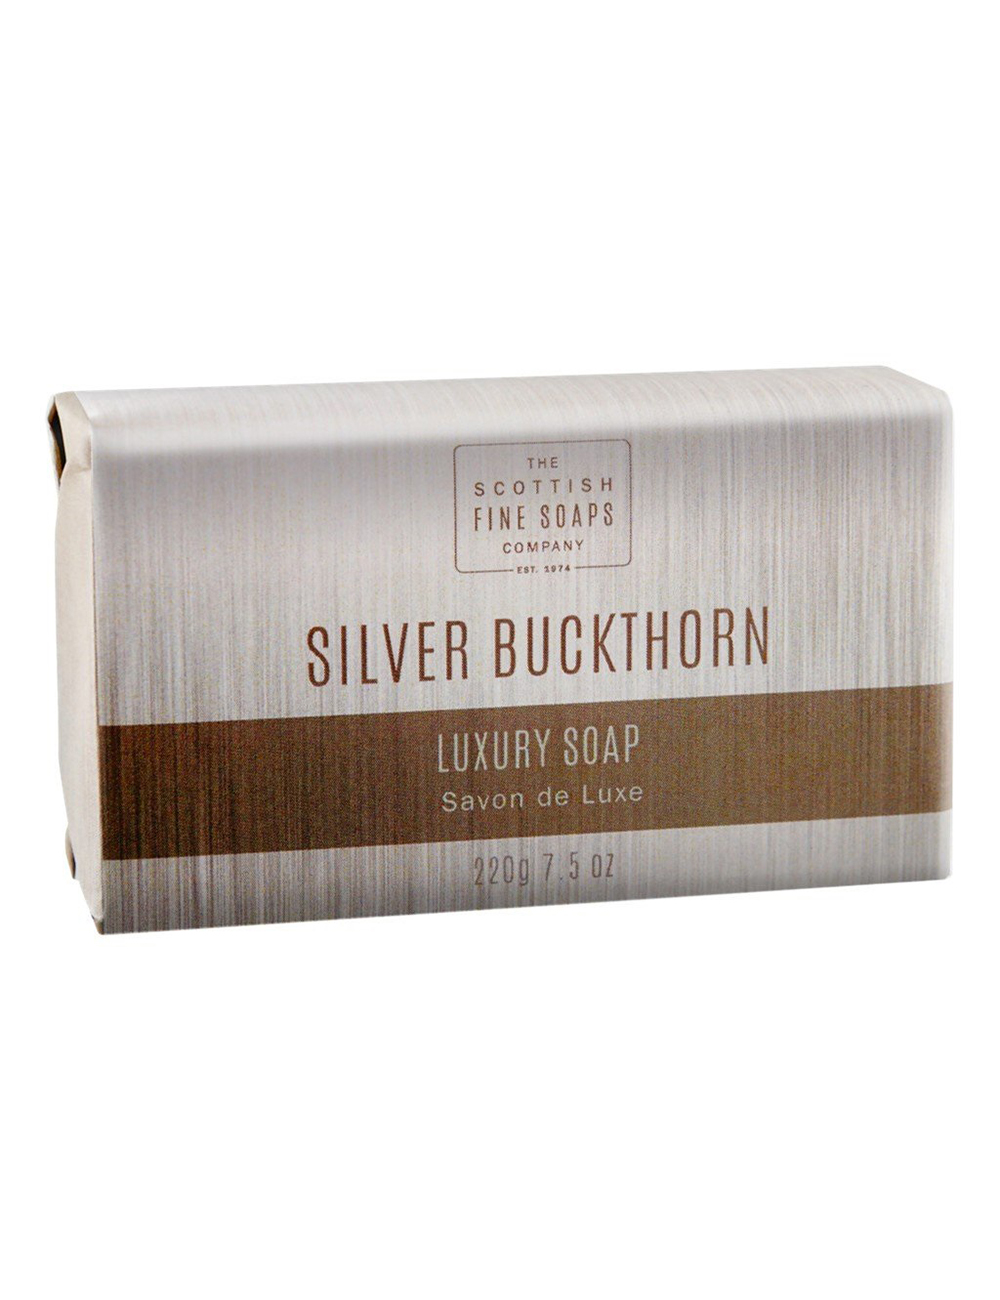 The Scottish Fine Soaps Company Silver Buckthorn Luxury Soap Bar 220g